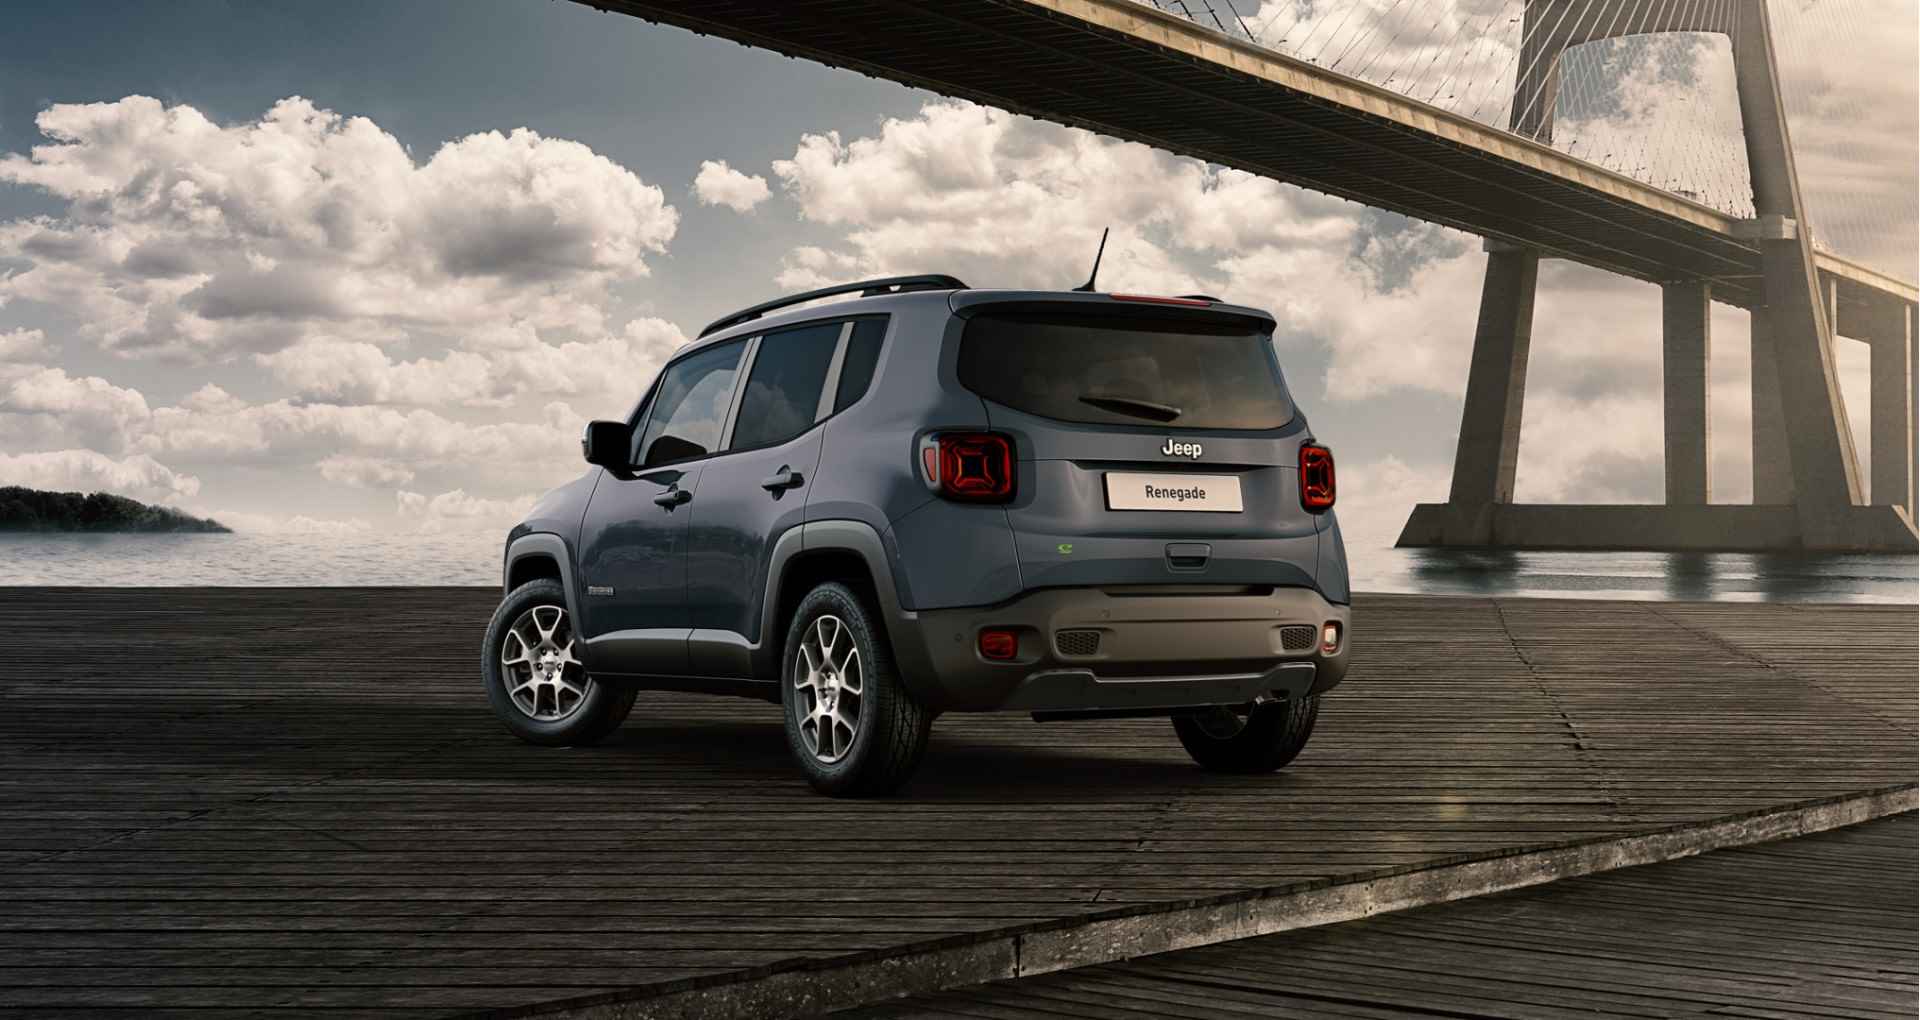 Jeep Renegade 1.5T 130 pk Automaat e-Hybrid Limited Convenience Pack | Style Pack |  Visibility Pack | Uconnect™ LIVE-infotainmentsysteem met 8,4-inch Touchscreen, Navigatie en Bluetooth - 3/9